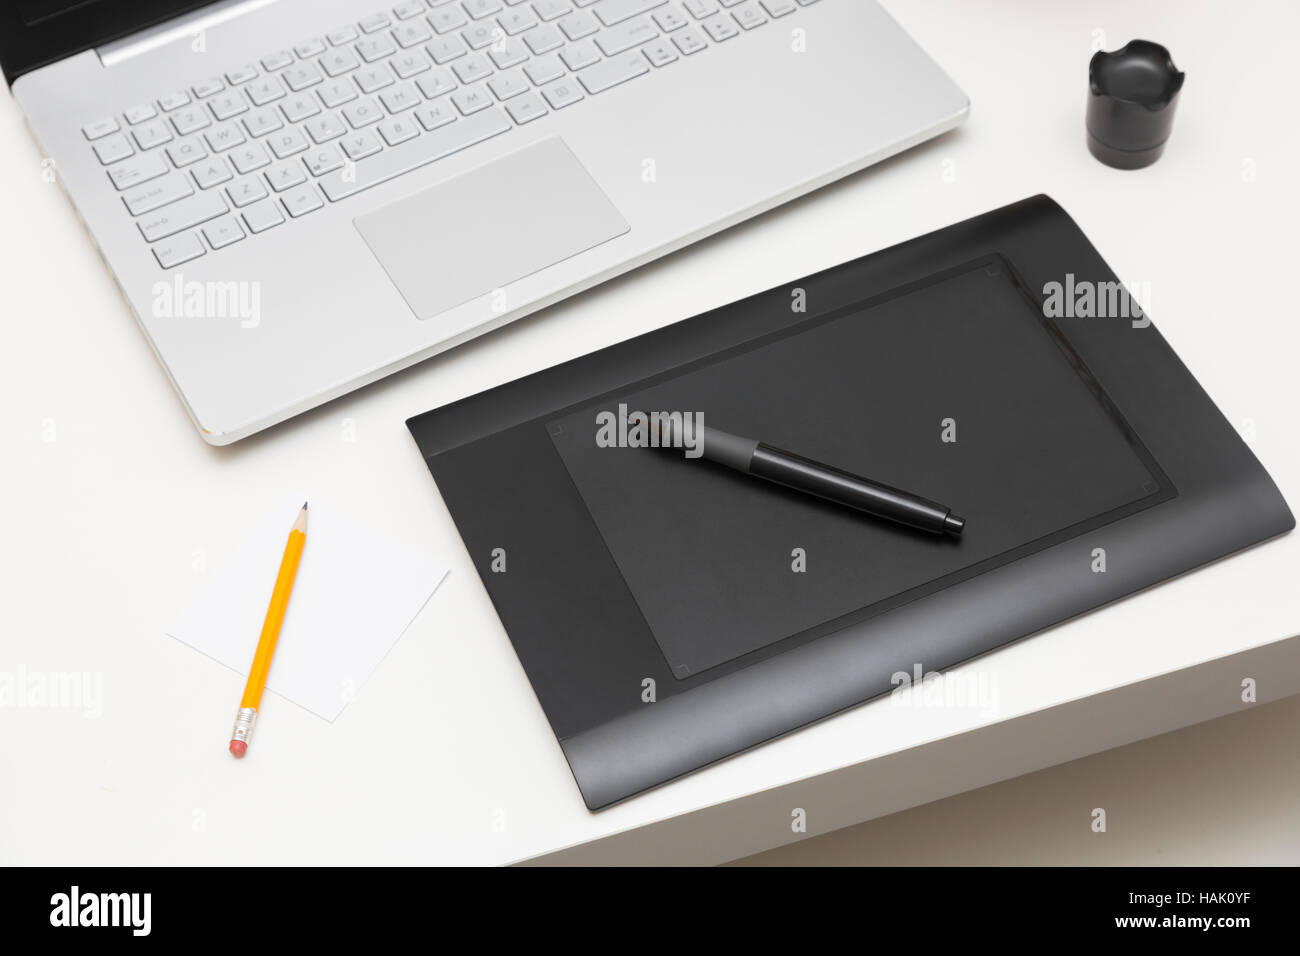 digital drawing tablet and laptop on the table Stock Photo